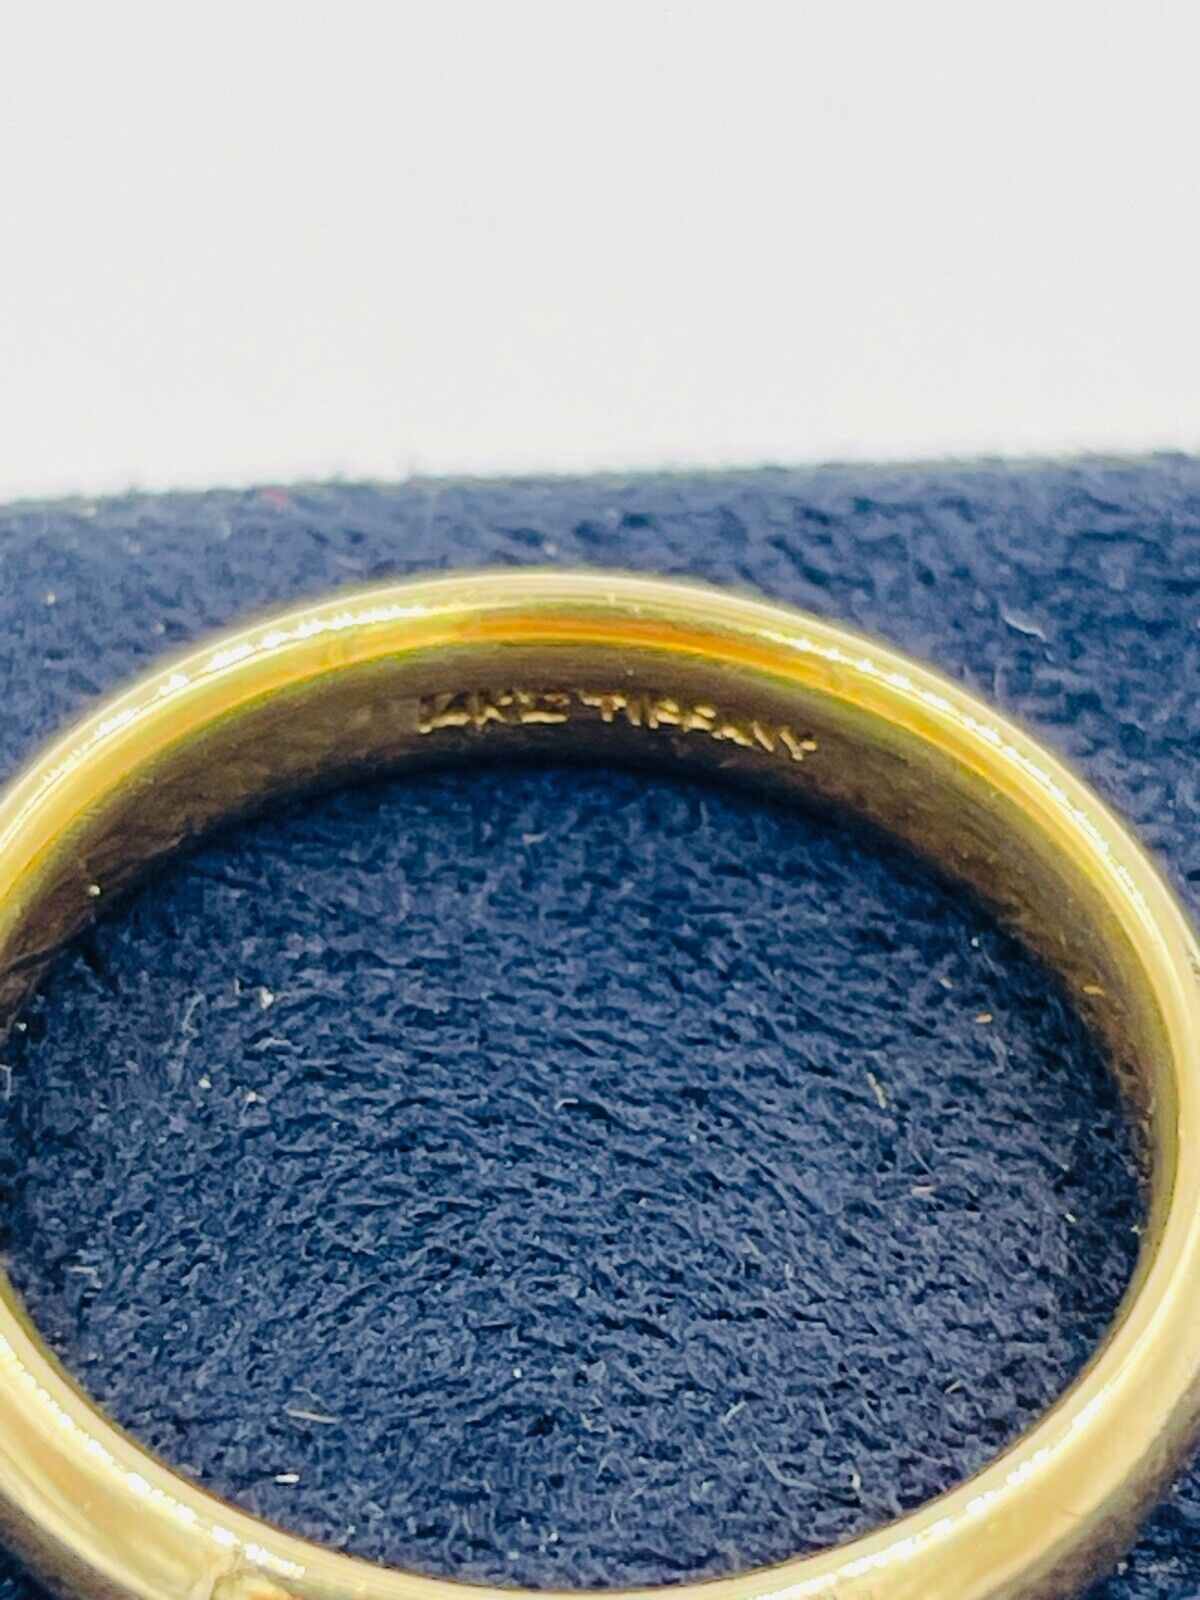 Vintage Tiffany & Co. 4.4mm 14k Yellow Gold Classic Wedding Band Ring